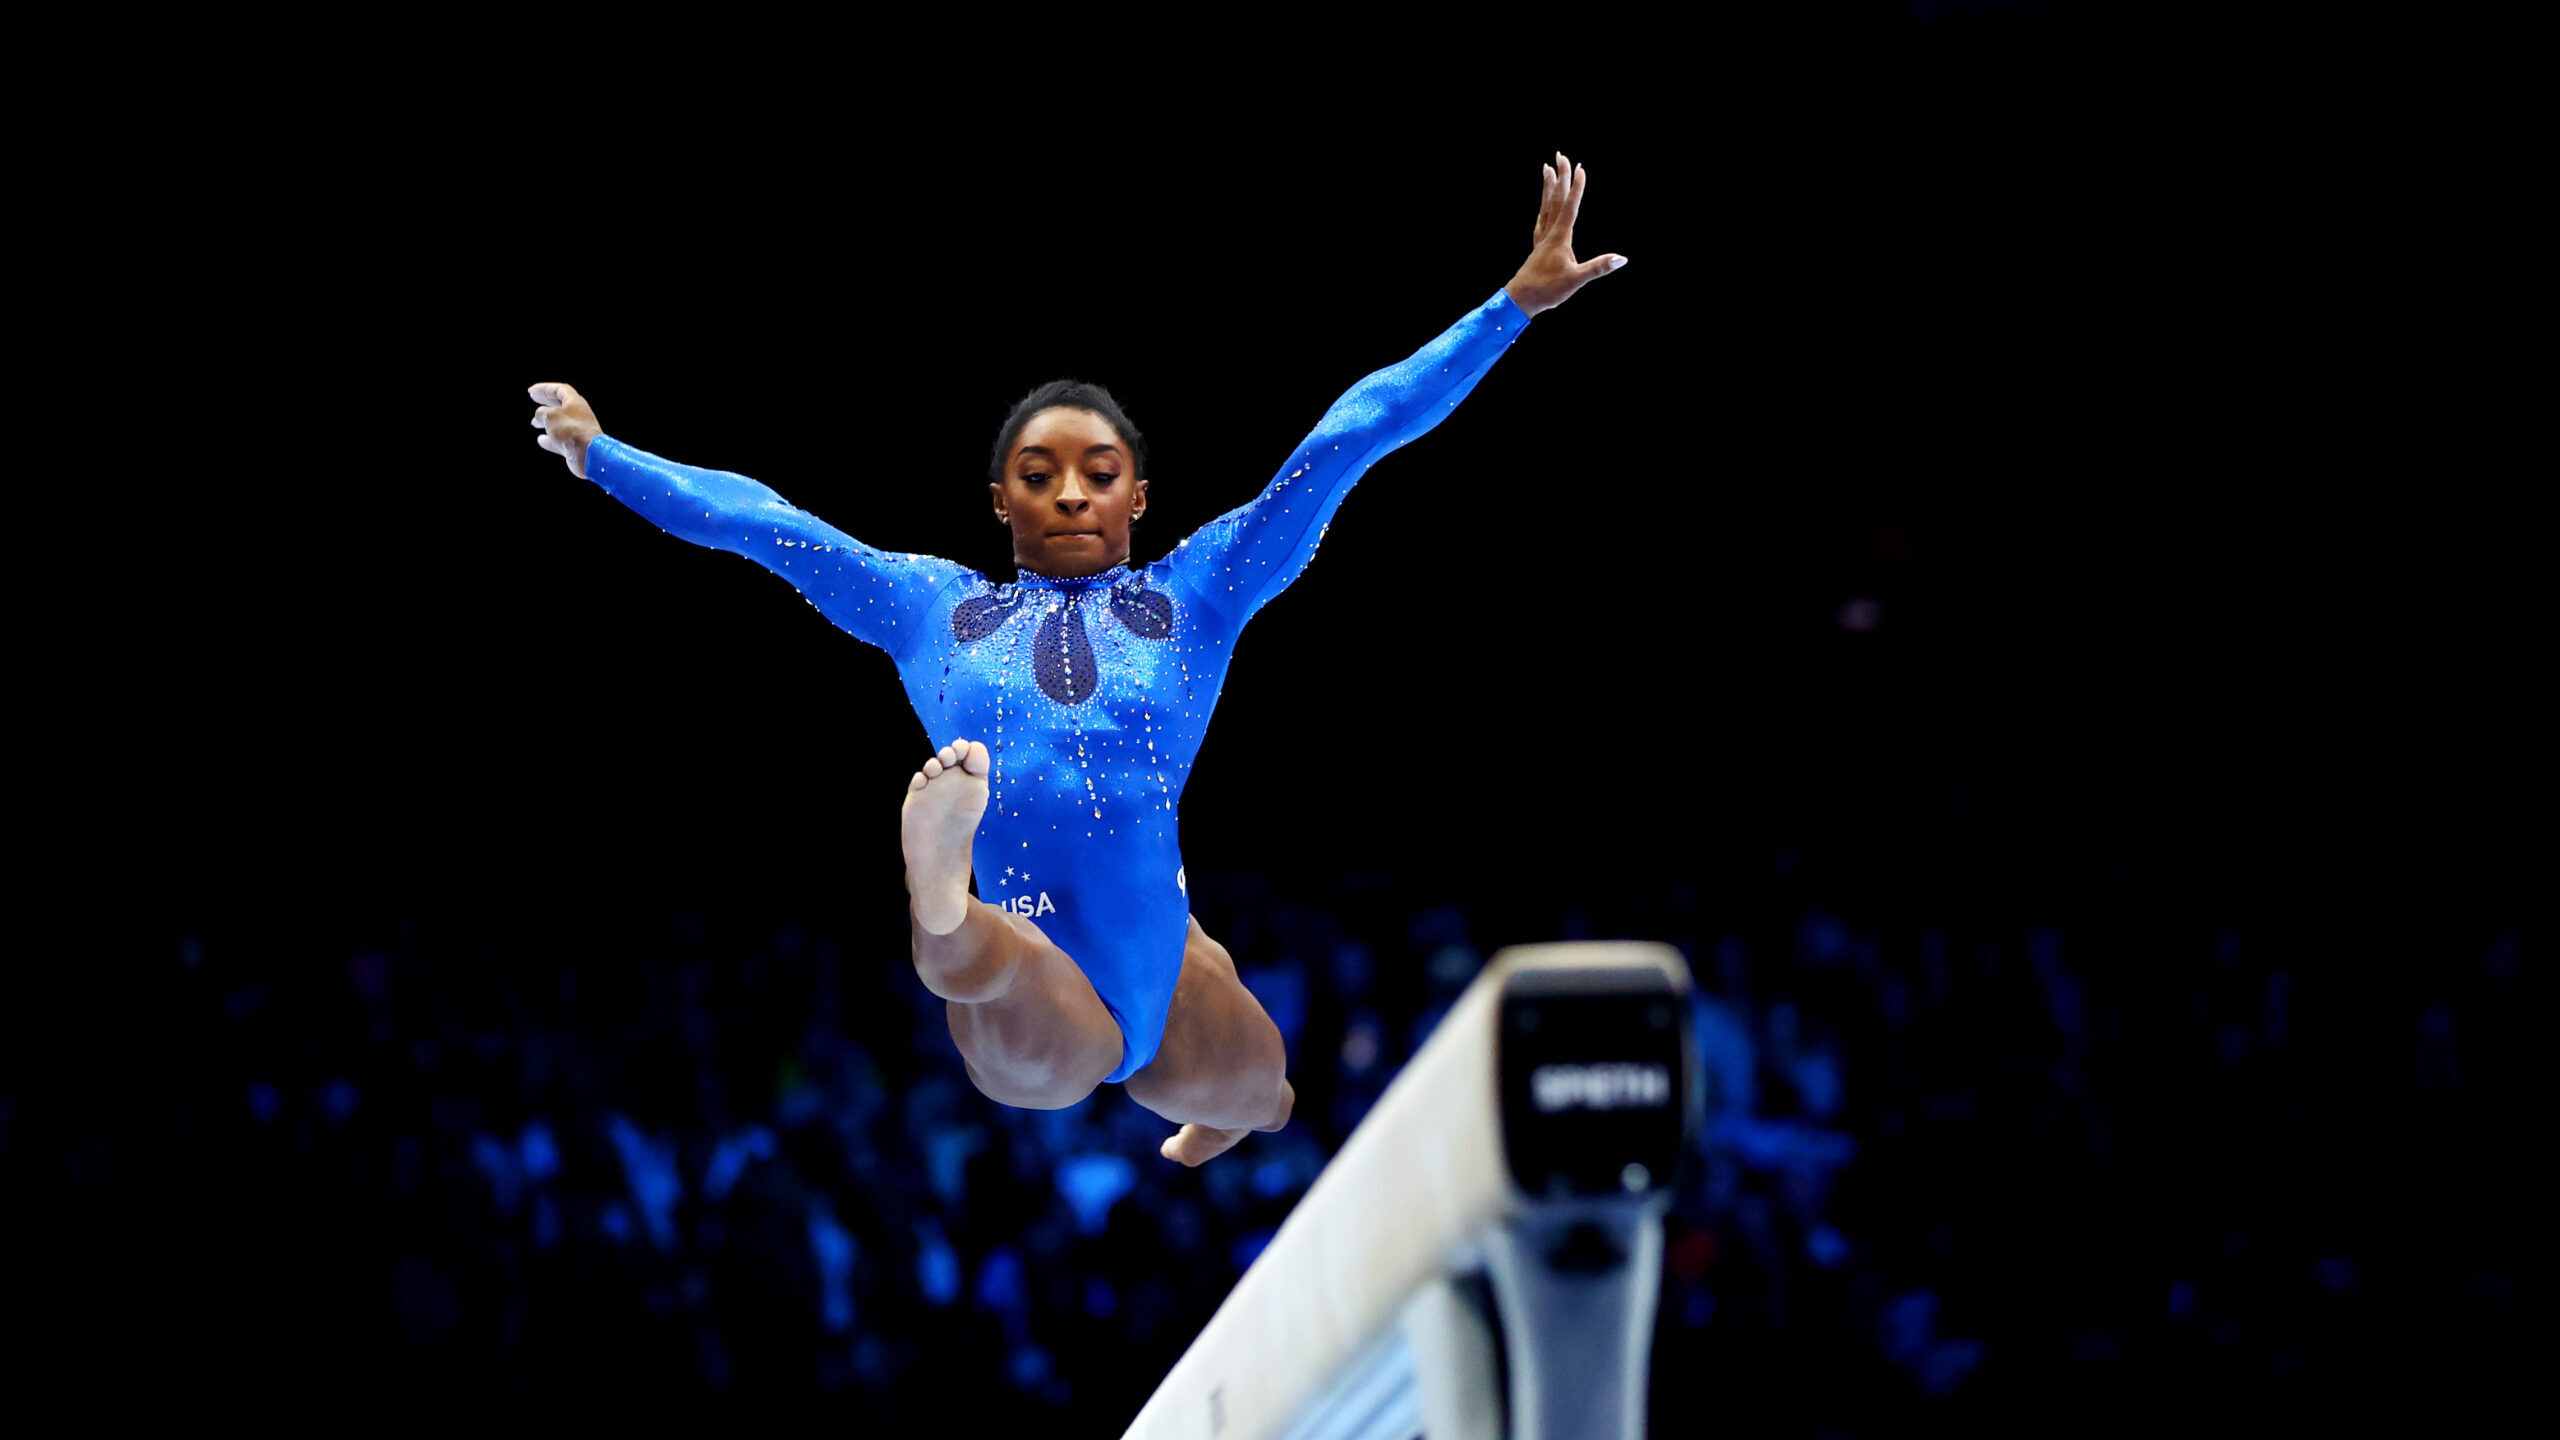 Simone Biles competes on the balance beam. Biles won her 6th all-around title at worlds....